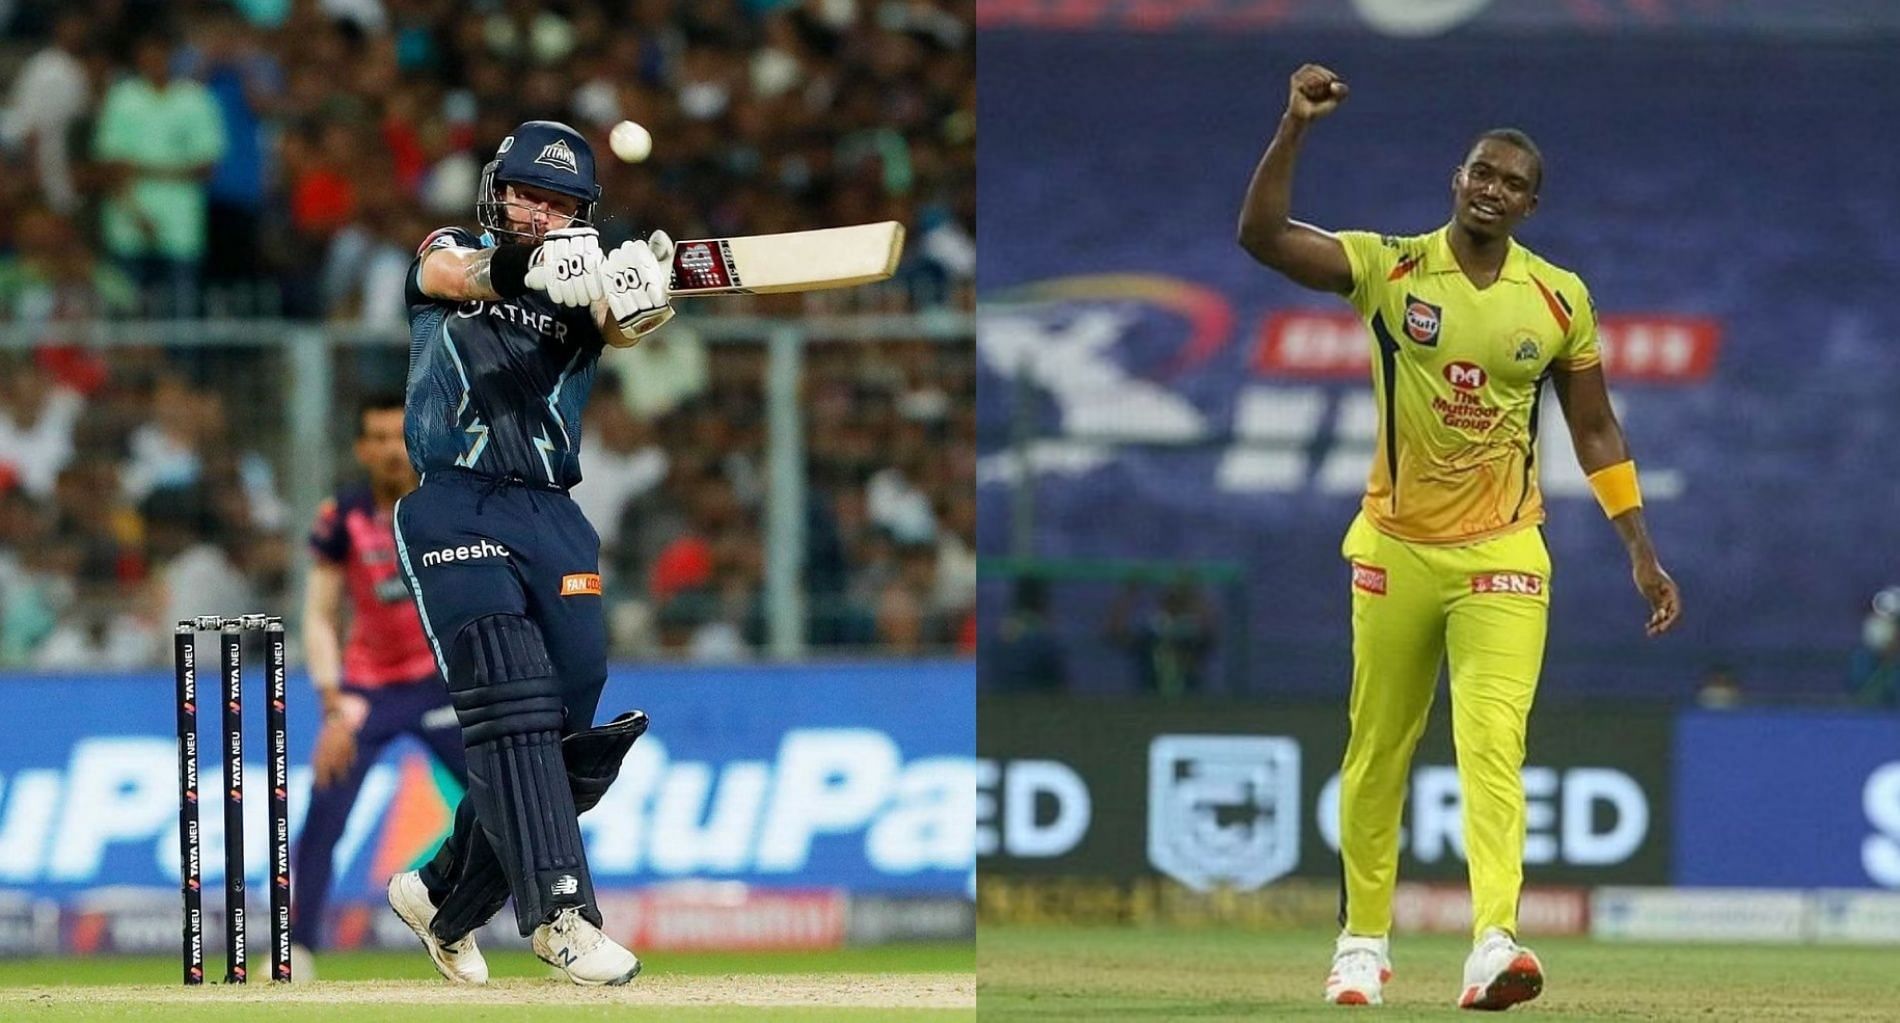 Benchwarmers XI - picking the best 11 players who didn't play a single game in IPL 2023